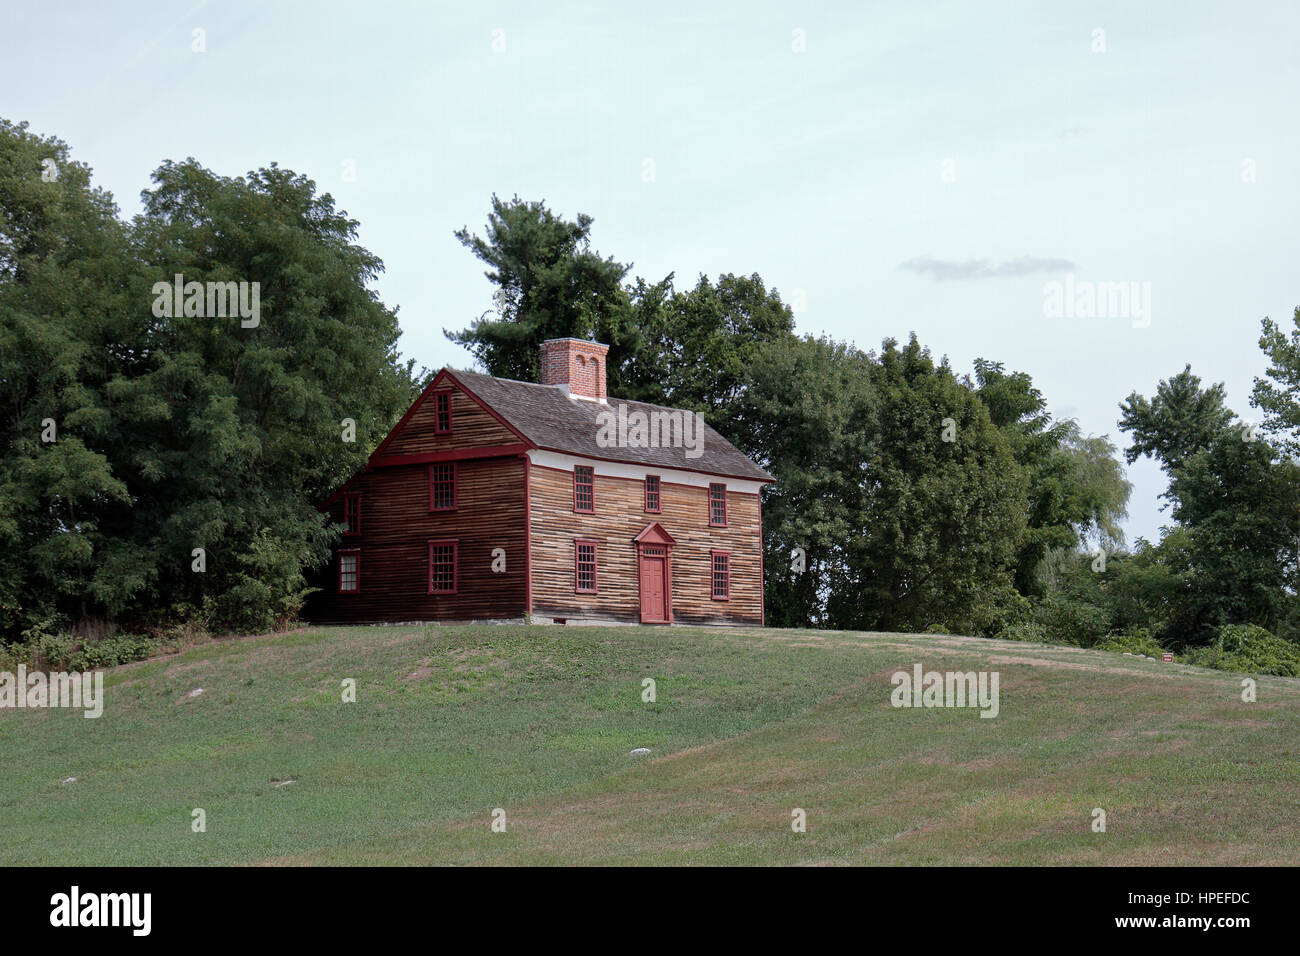 Capt William Smith Haus in Minute Man National Historical Park, Middlesex County, Massachusetts, USA. Stockfoto